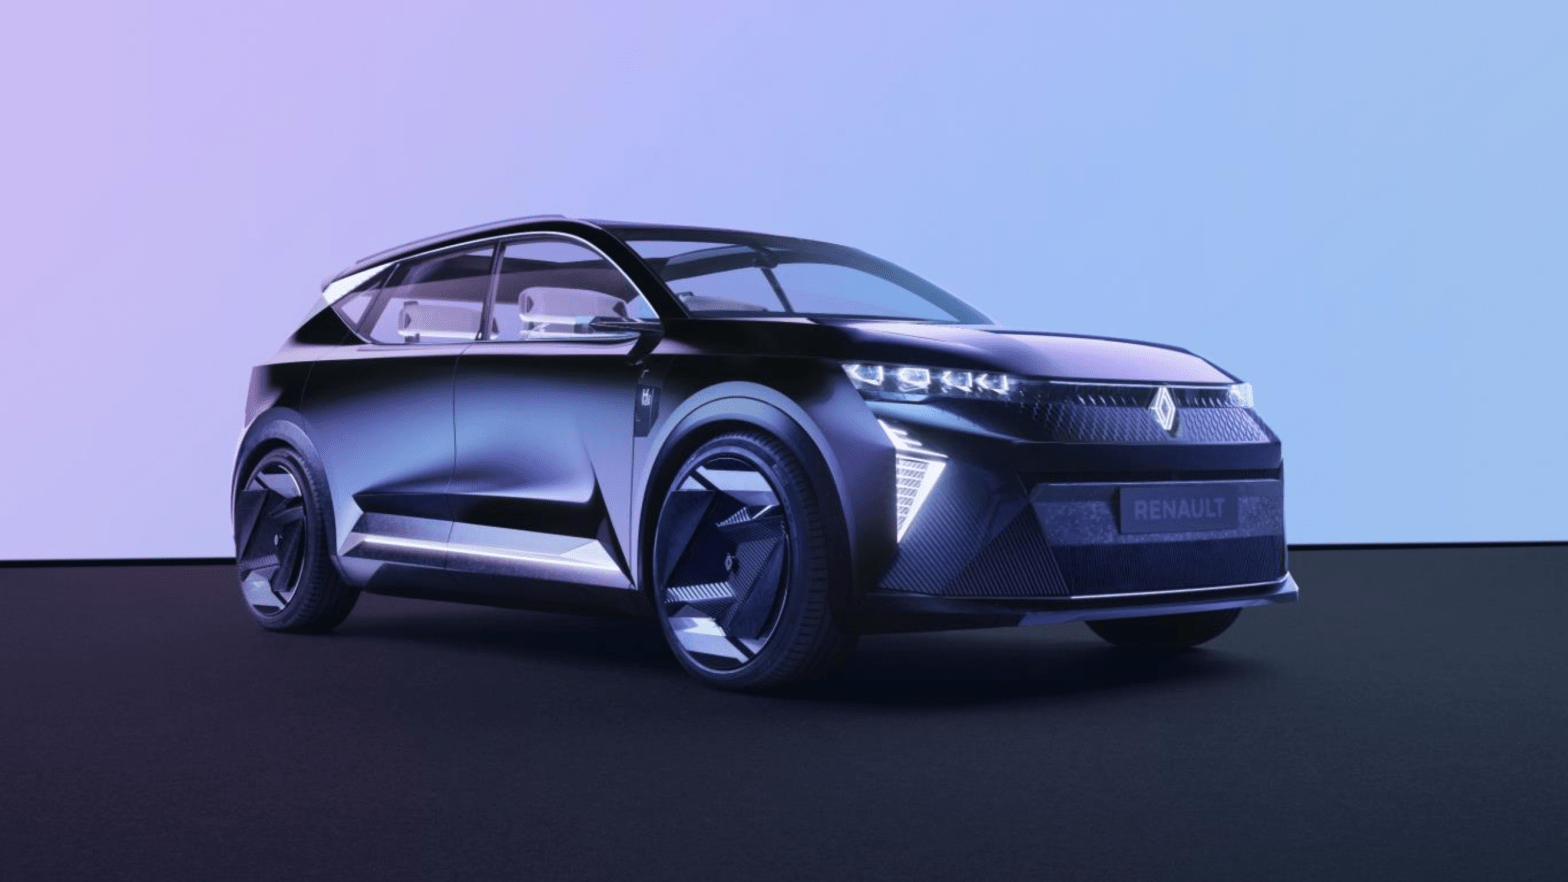 Renault claims that their new hydrogen battery will be ready by 2030. (Image: Renault)